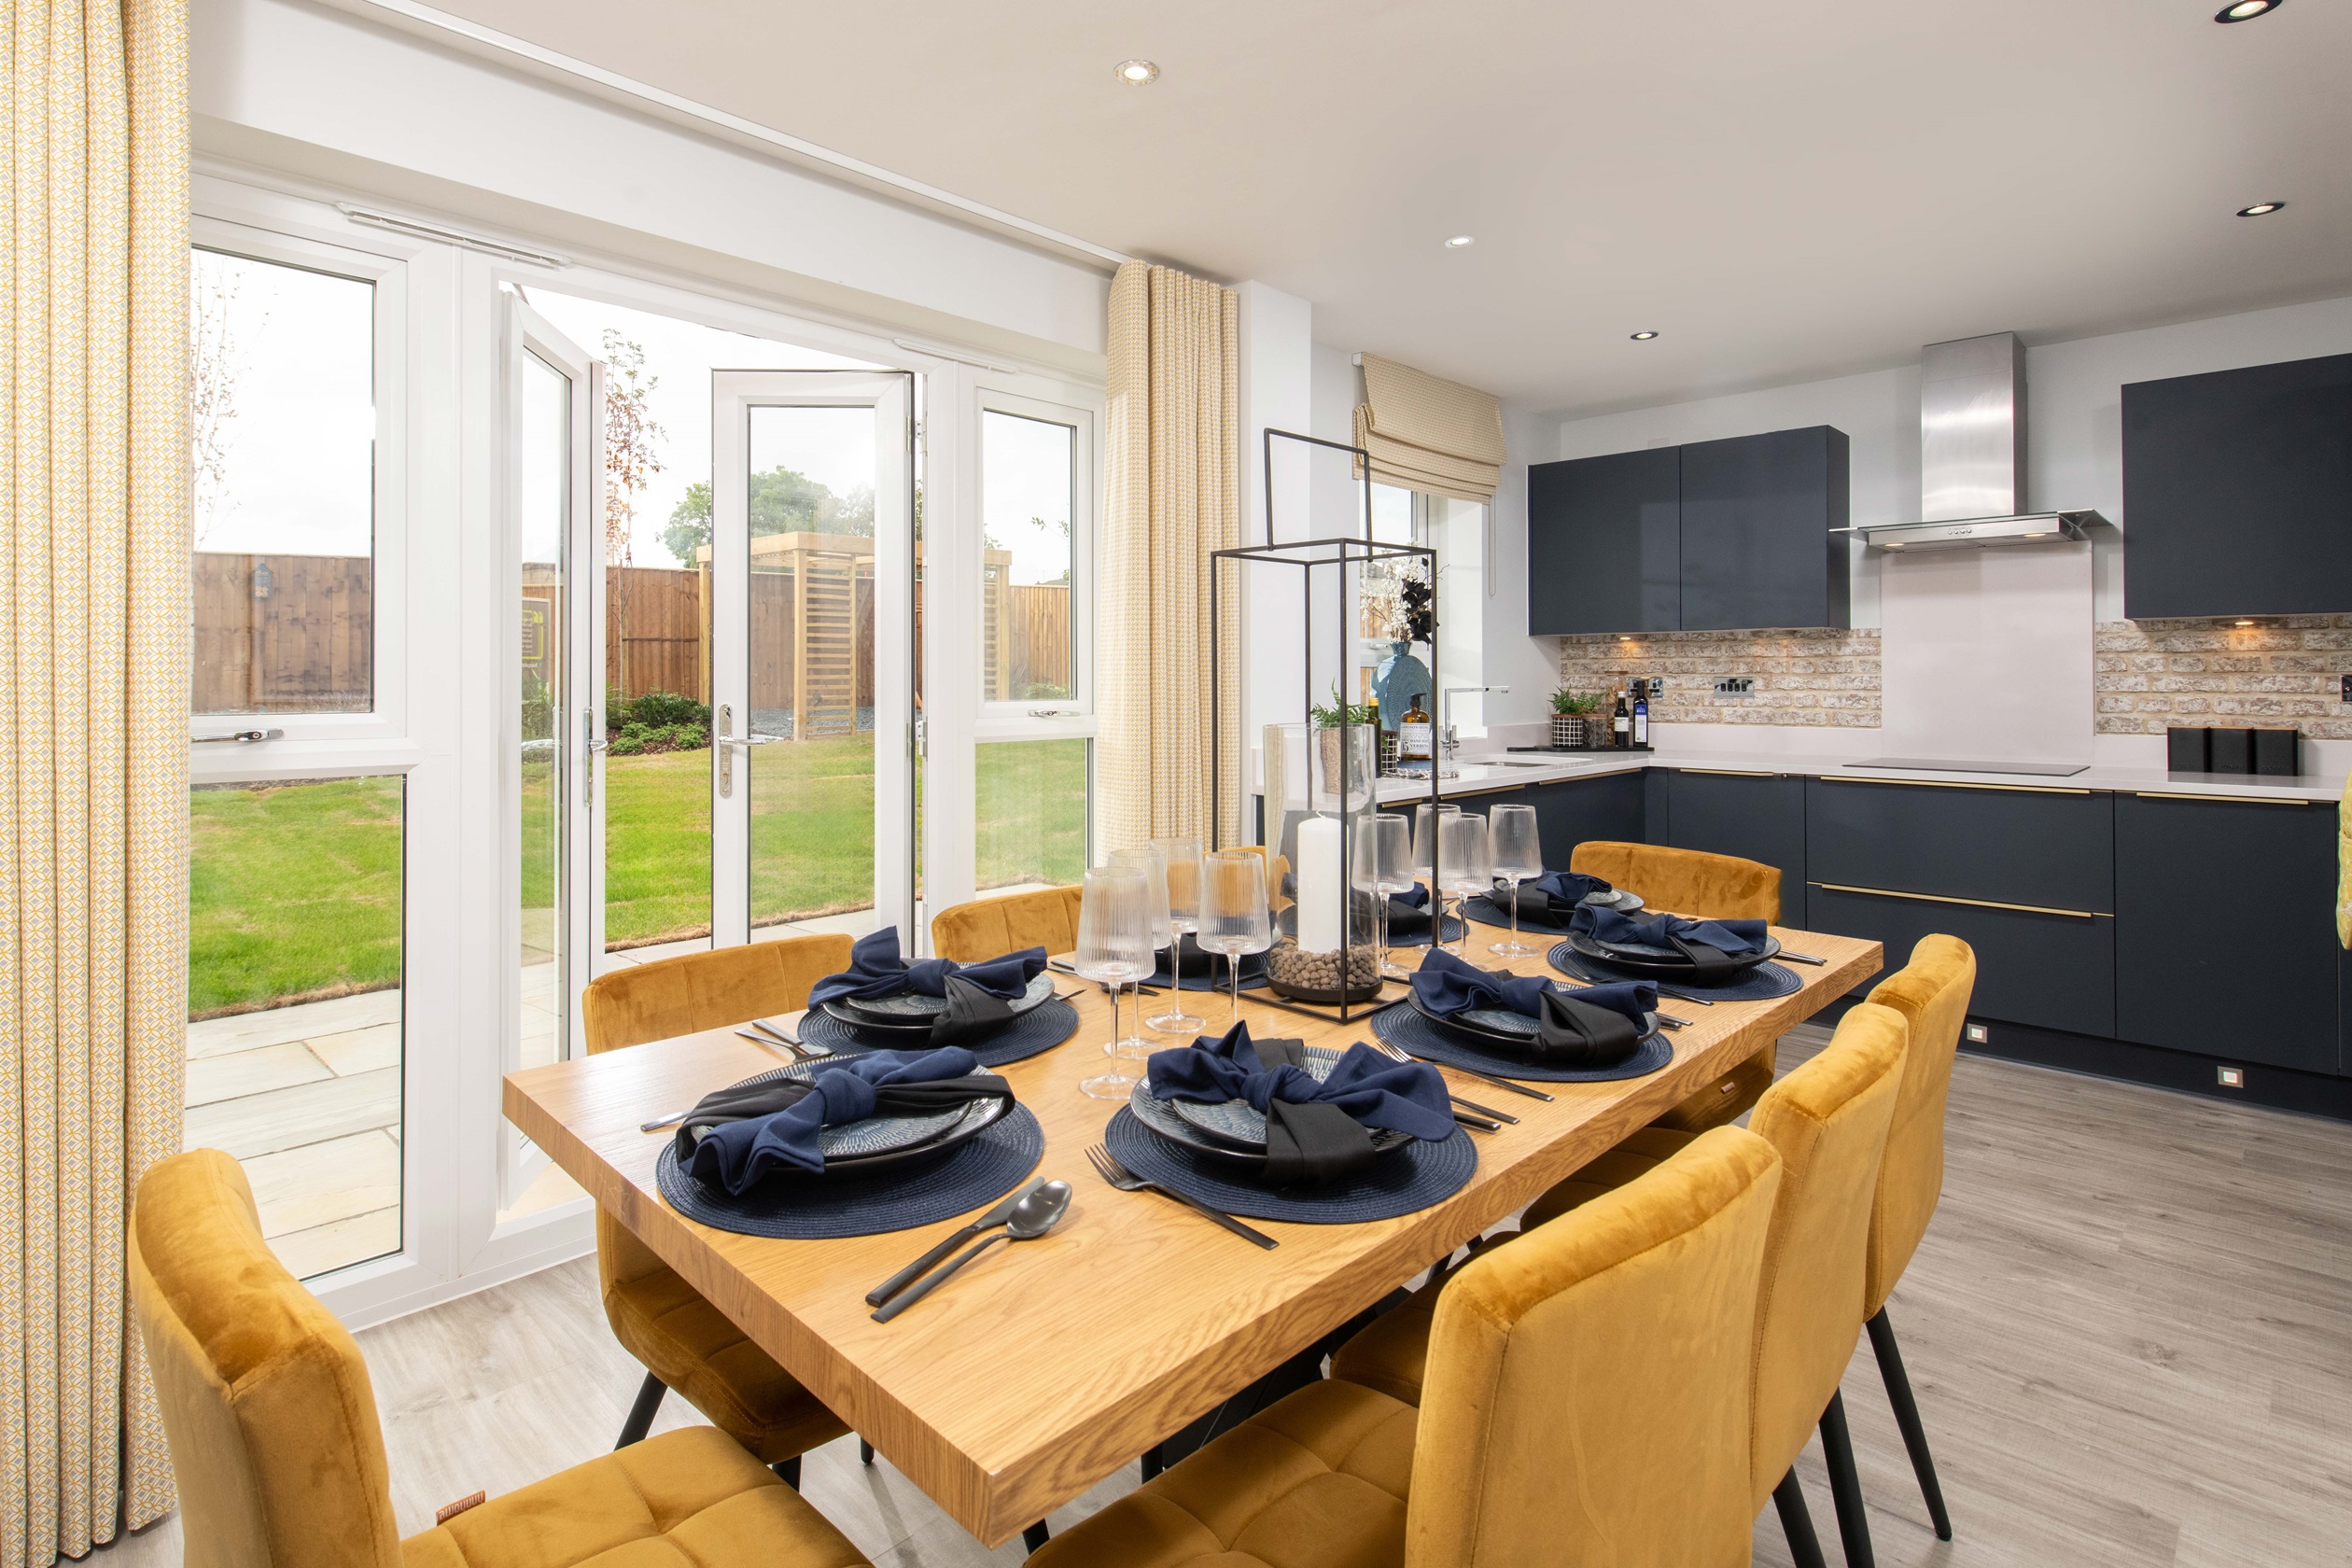 Property 3 of 10. Windermere Kitchen Dining